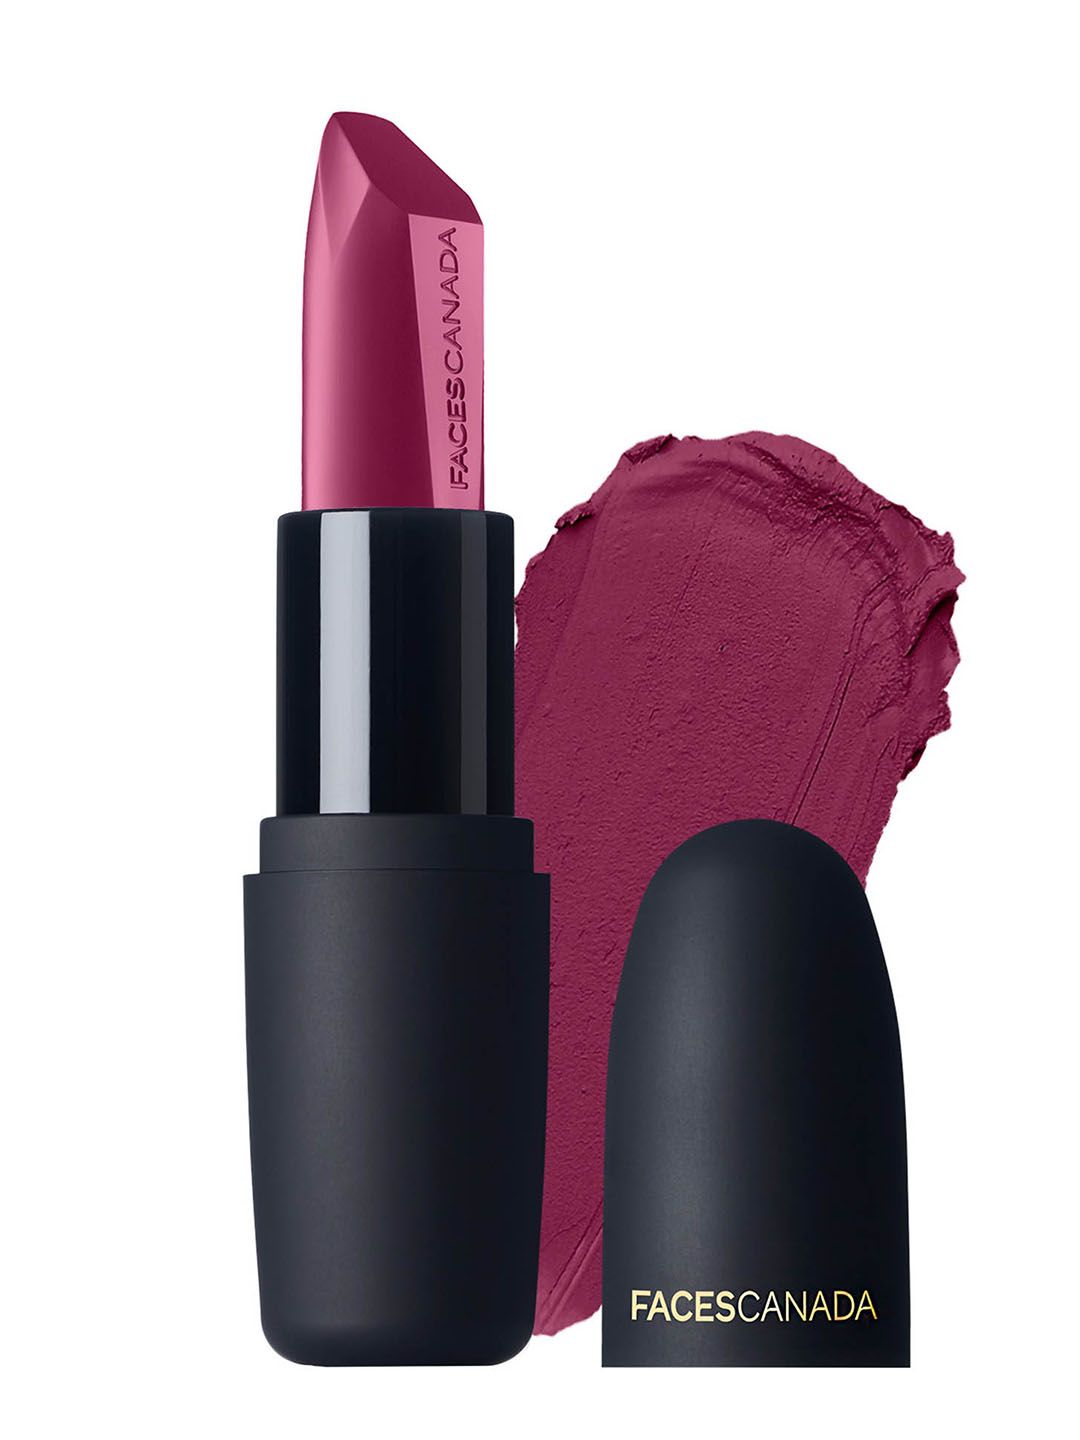 Faces Canada Weightless Matte Hydrating Lipstick with Almond Oil - Hot Plum 24 Price in India